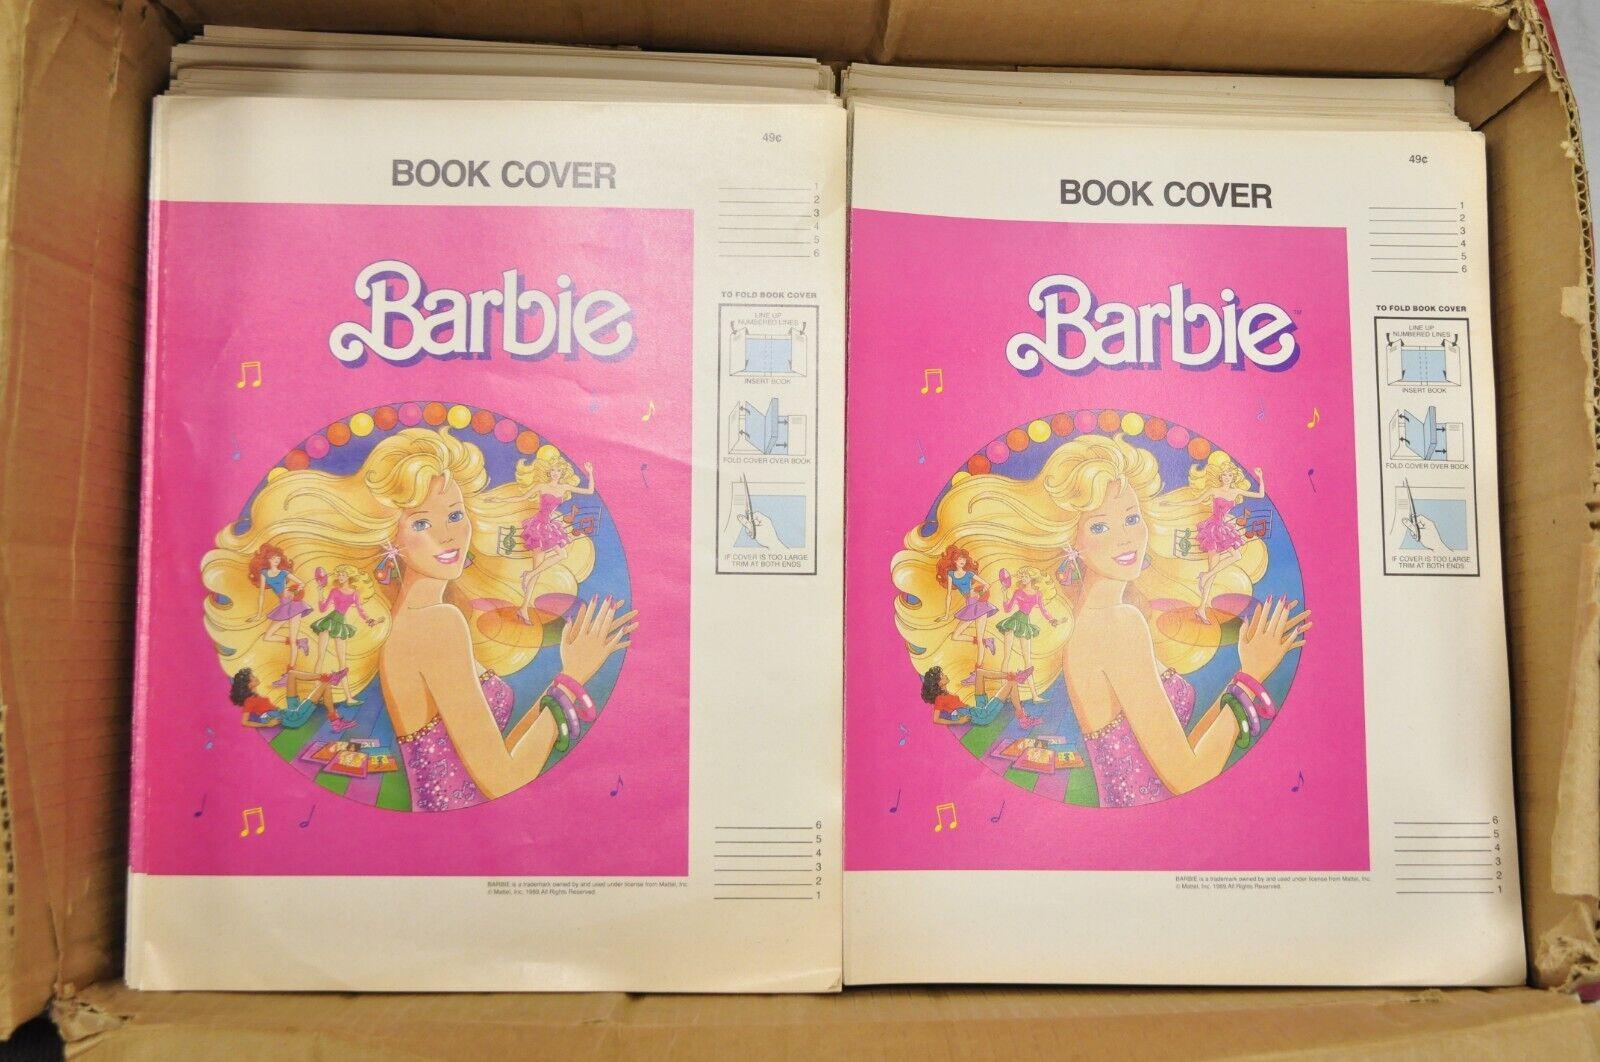 Vintage 1989 Barbie Mattel Original Pink Paper Book Covers NOS - Many Available. Item features new old stock vintage collection of Mattel Barbie book covers. Circa 1989. Measurements: 14.25